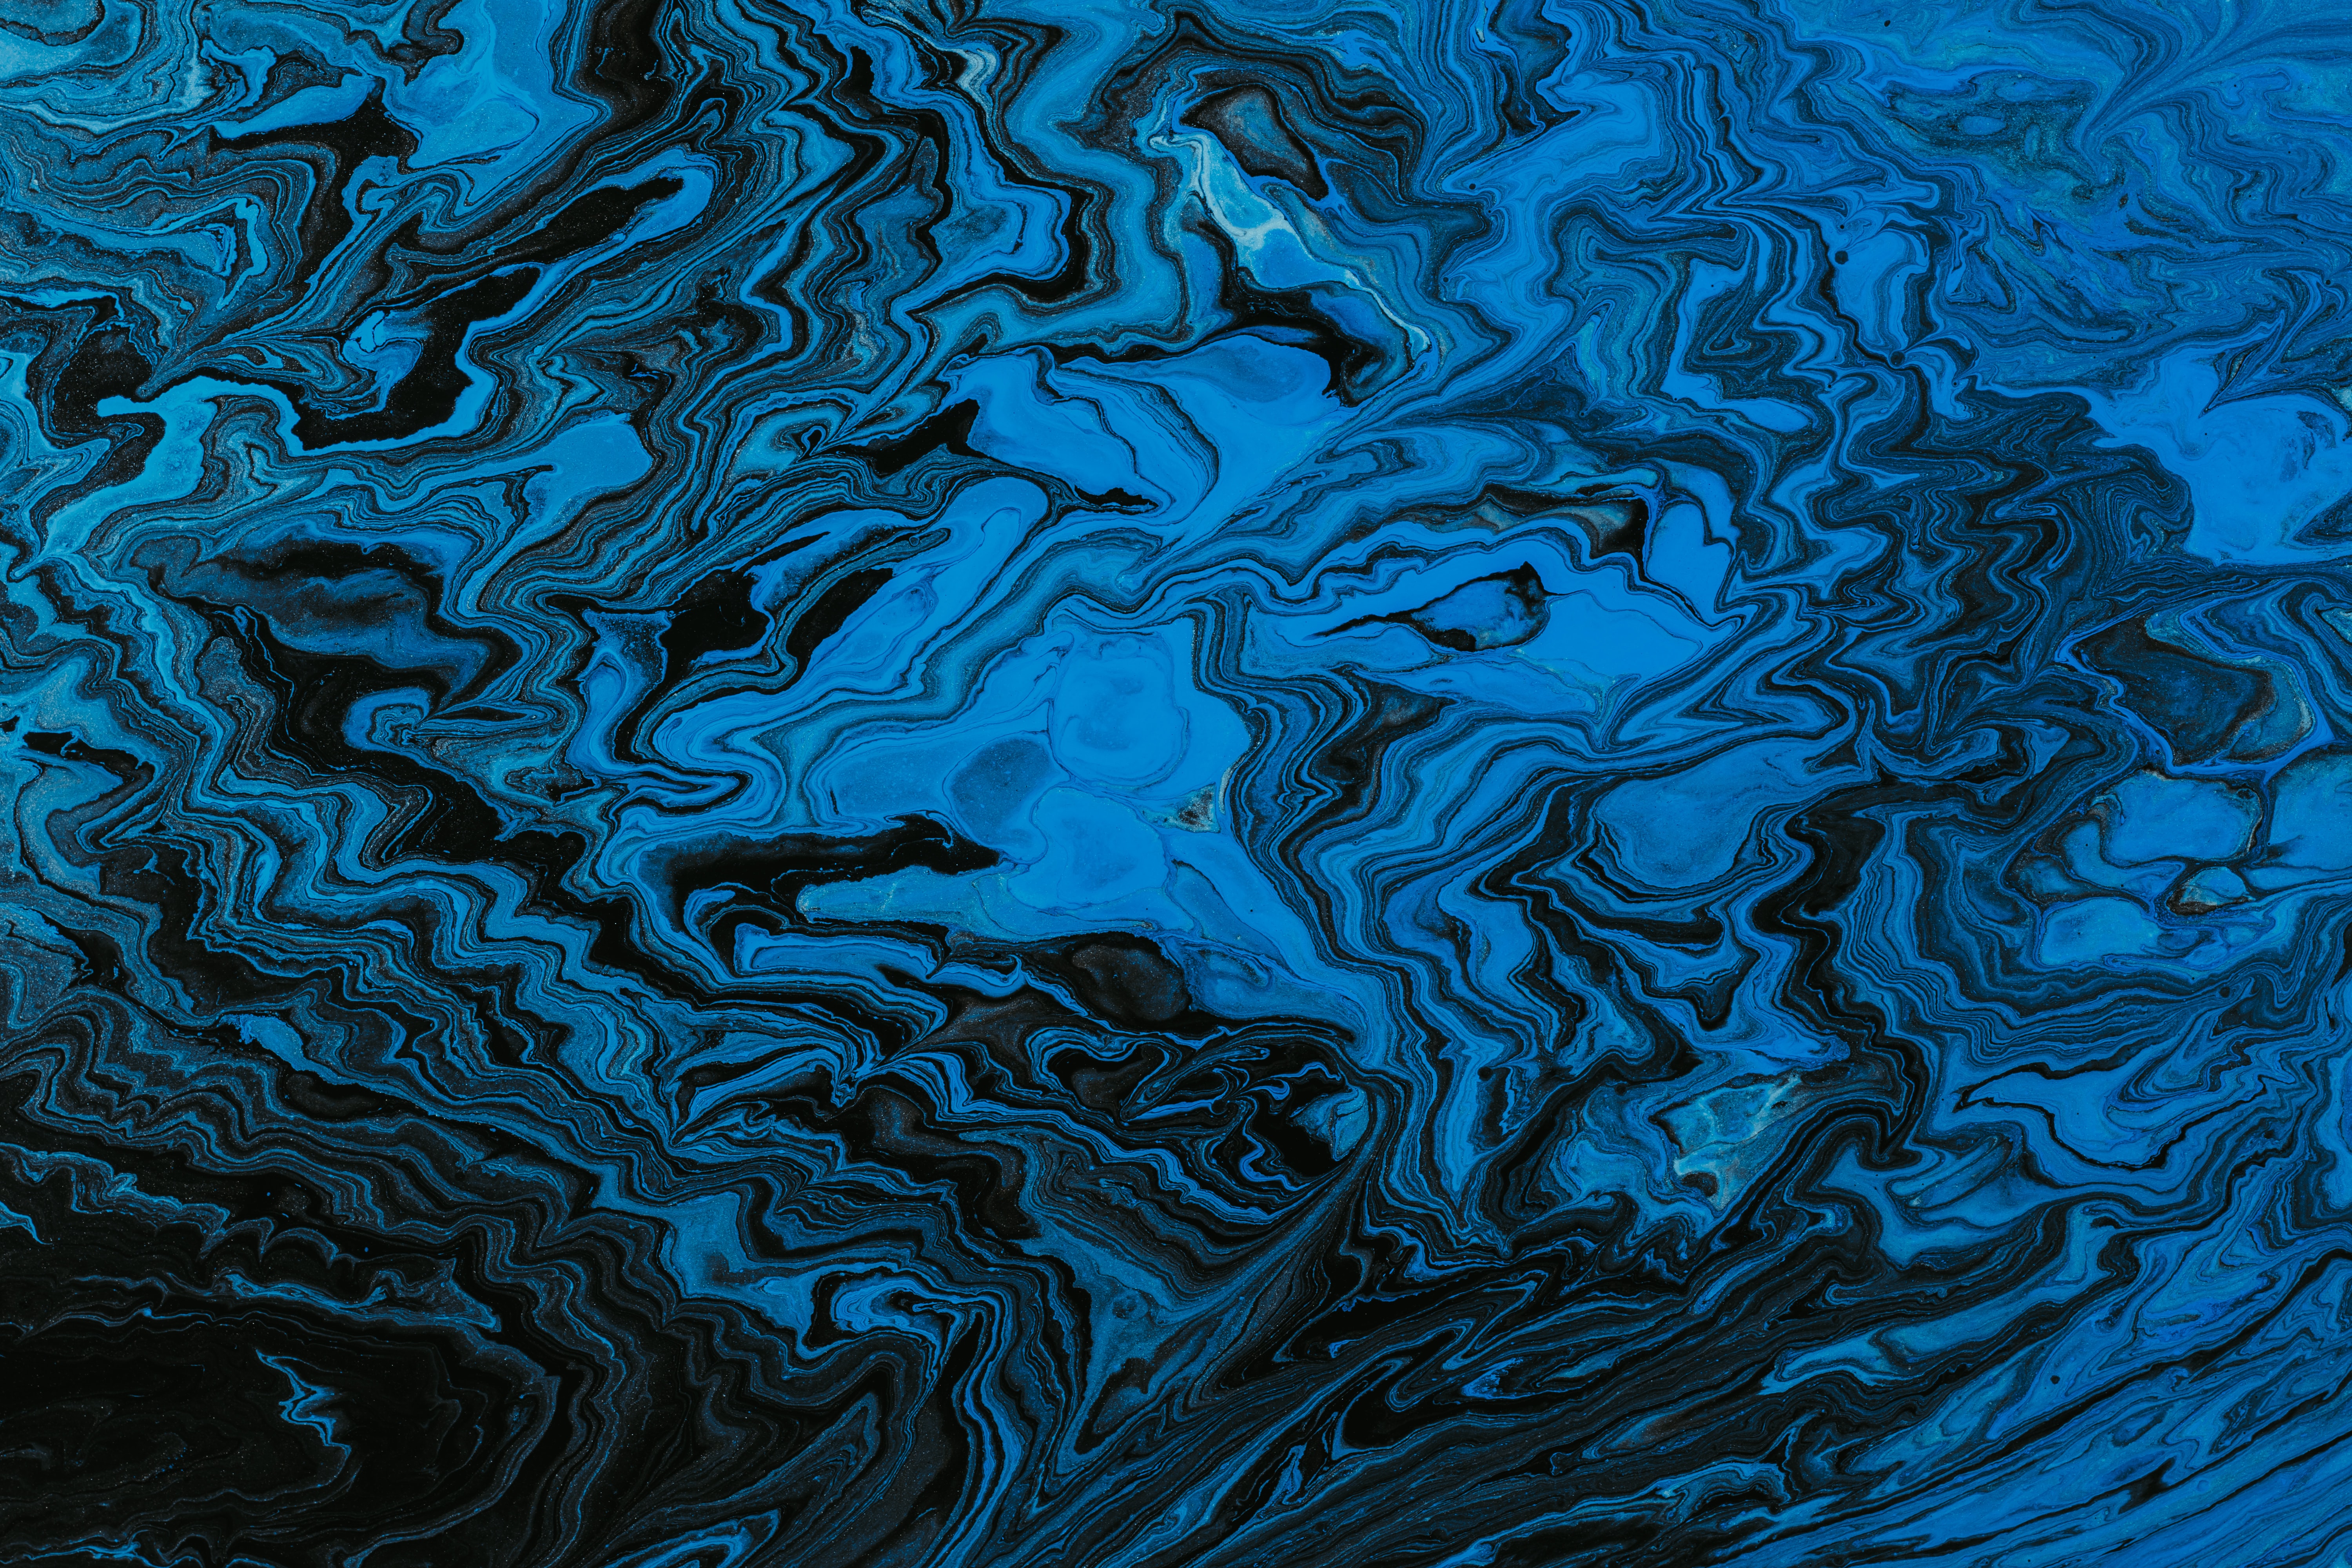 61969 download wallpaper wavy, abstract, divorces, paint, liquid, fluid art screensavers and pictures for free